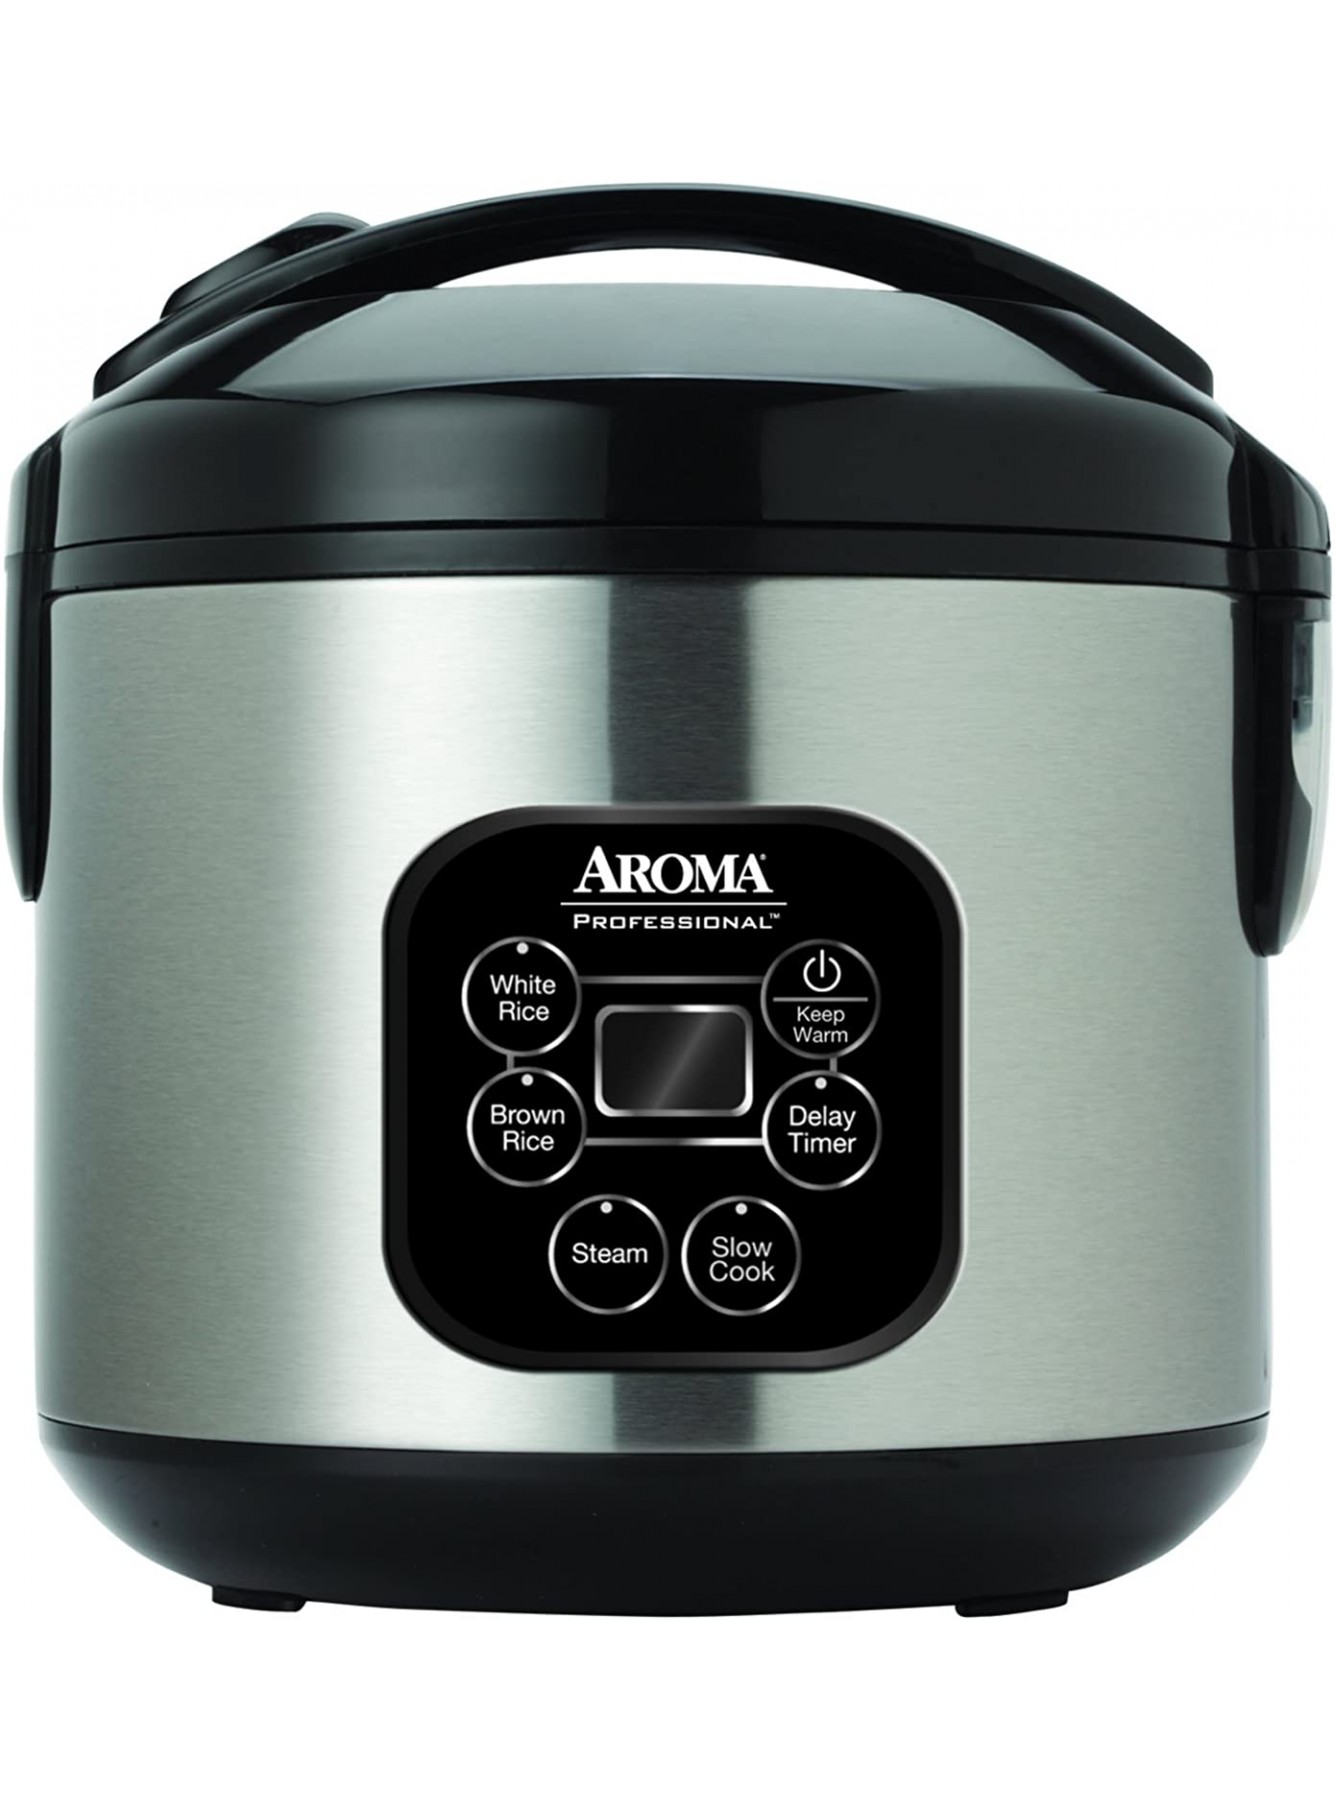 Aroma Professional Rice Cooker Multicooker Silver ARC-934SBD B071LD8JHM